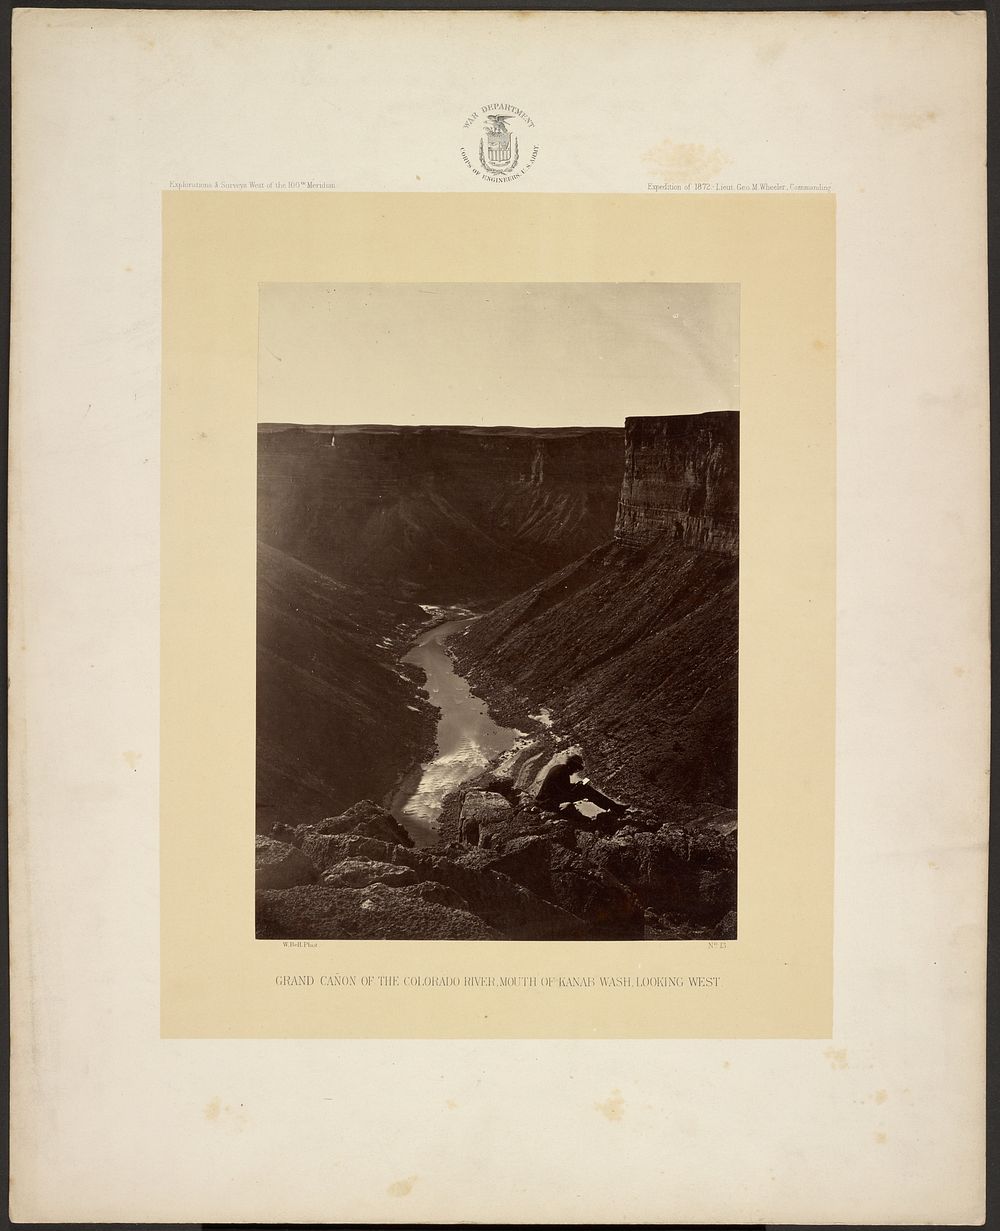 Grand Cañon of the Colorado River, Mouth of Kanab Wash, Looking West by William H Bell